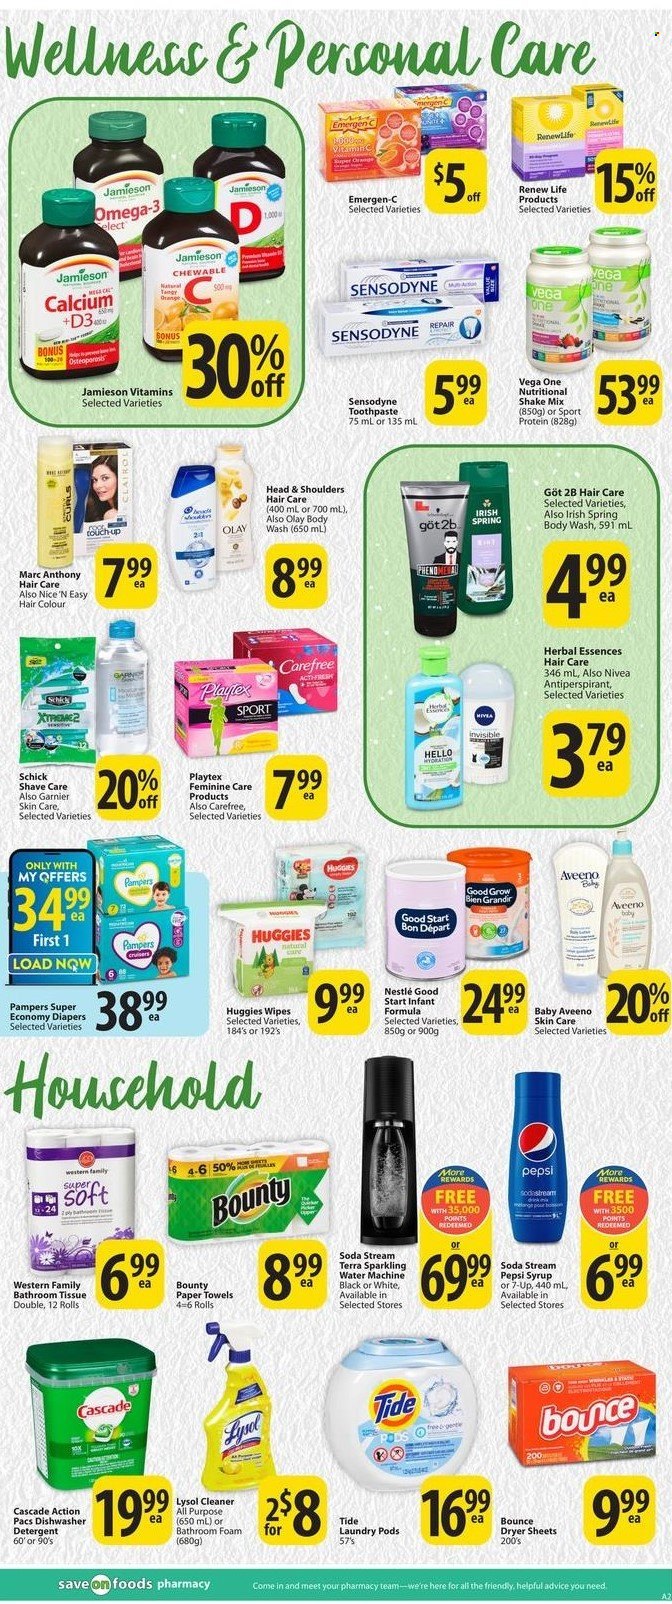 thumbnail - Save-On-Foods Flyer - November 24, 2022 - November 30, 2022 - Sales products - oranges, shake, Bounty, syrup, Pepsi, 7UP, wipes, nappies, Aveeno, Nivea, bath tissue, kitchen towels, paper towels, cleaner, Lysol, Tide, Bounce, Cascade, dryer sheets, body wash, toothpaste, Playtex, Carefree, Olay, hair color, Herbal Essences, anti-perspirant, Schick, SodaStream, vitamin c, Omega-3, Emergen-C, vitamin D3, calcium, detergent, Garnier, Nestlé, Head & Shoulders, Huggies, Pampers, Sensodyne. Page 14.